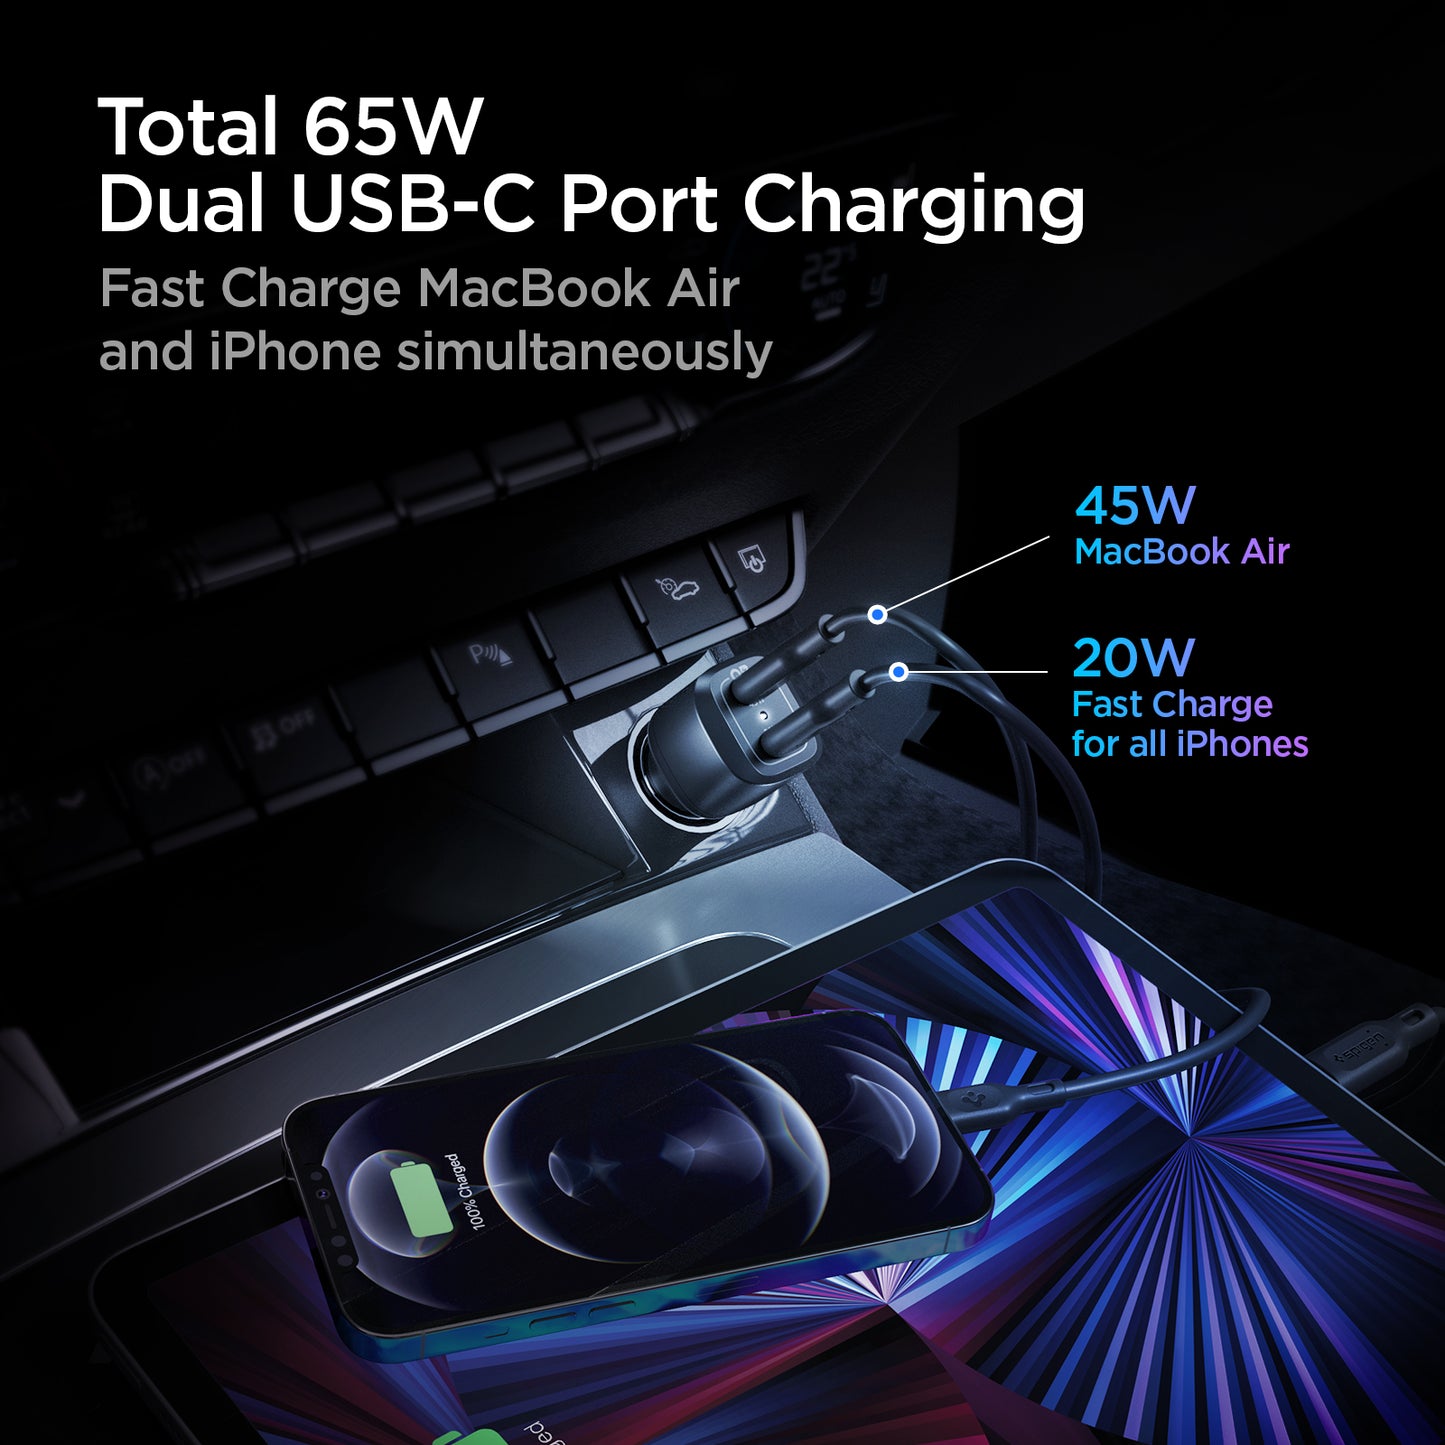 ACP02562 - ArcStation™ Dual Port Car Charger PC2000 in Black showing the Total 65W Dual USB-C Port Charging. Fast Charge MacBook Air and iPhone simultaneously. 45W MacBook Air and 20W Fast Charge for all iPhones